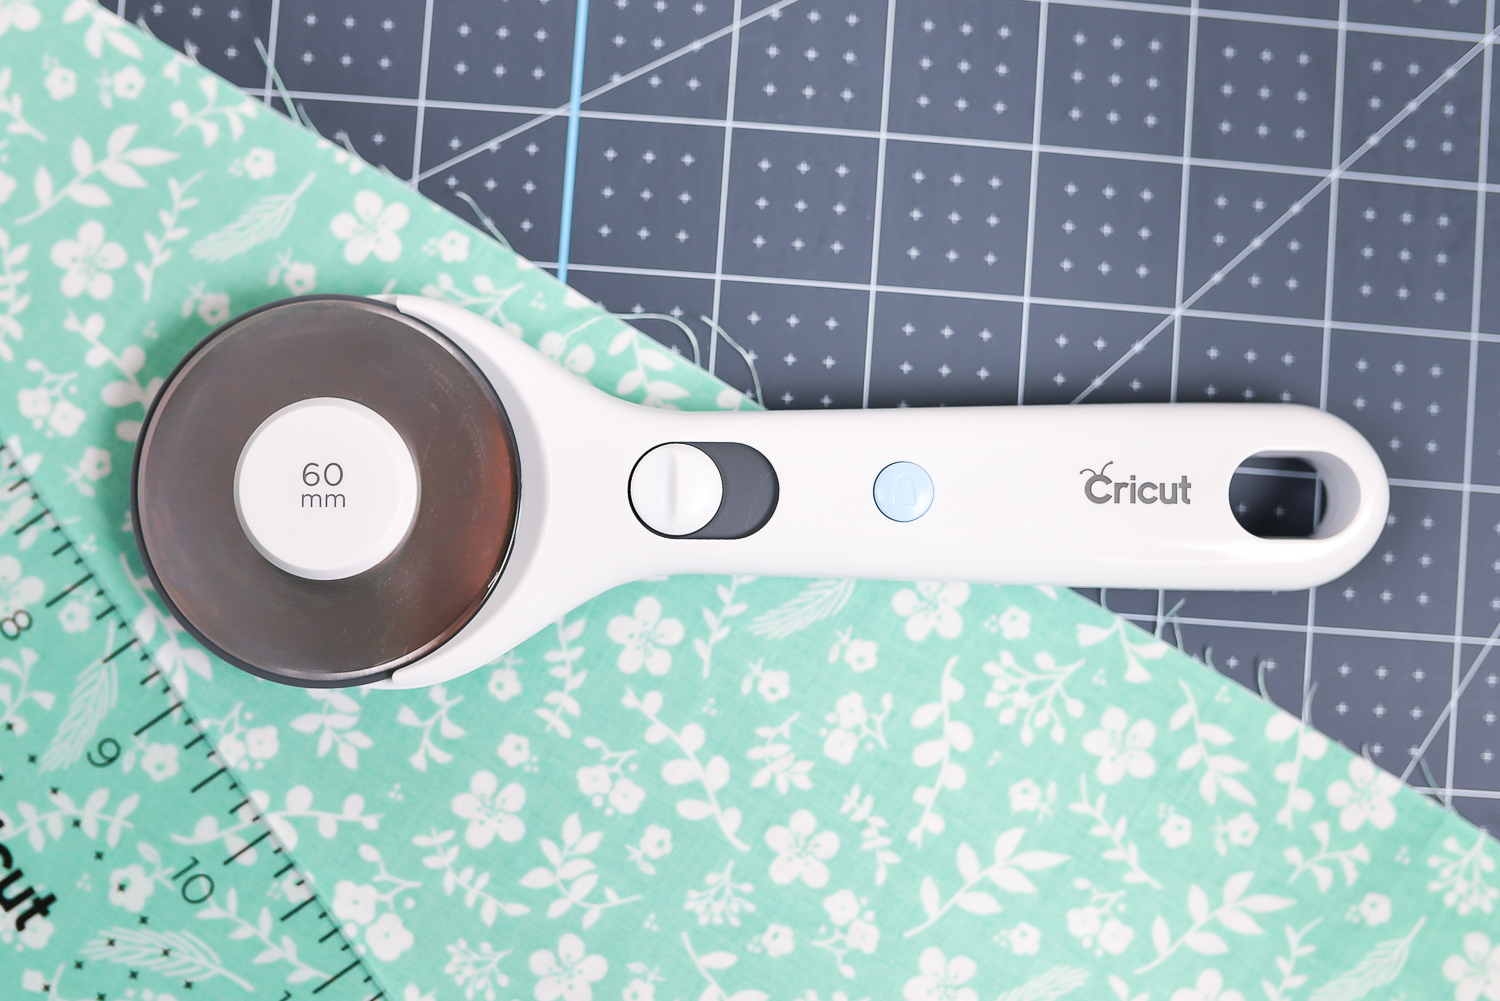 A close up of the Cricut rotary cutter, the acrylic ruler and a piece of fabric on top of the Cricut self-healing mat